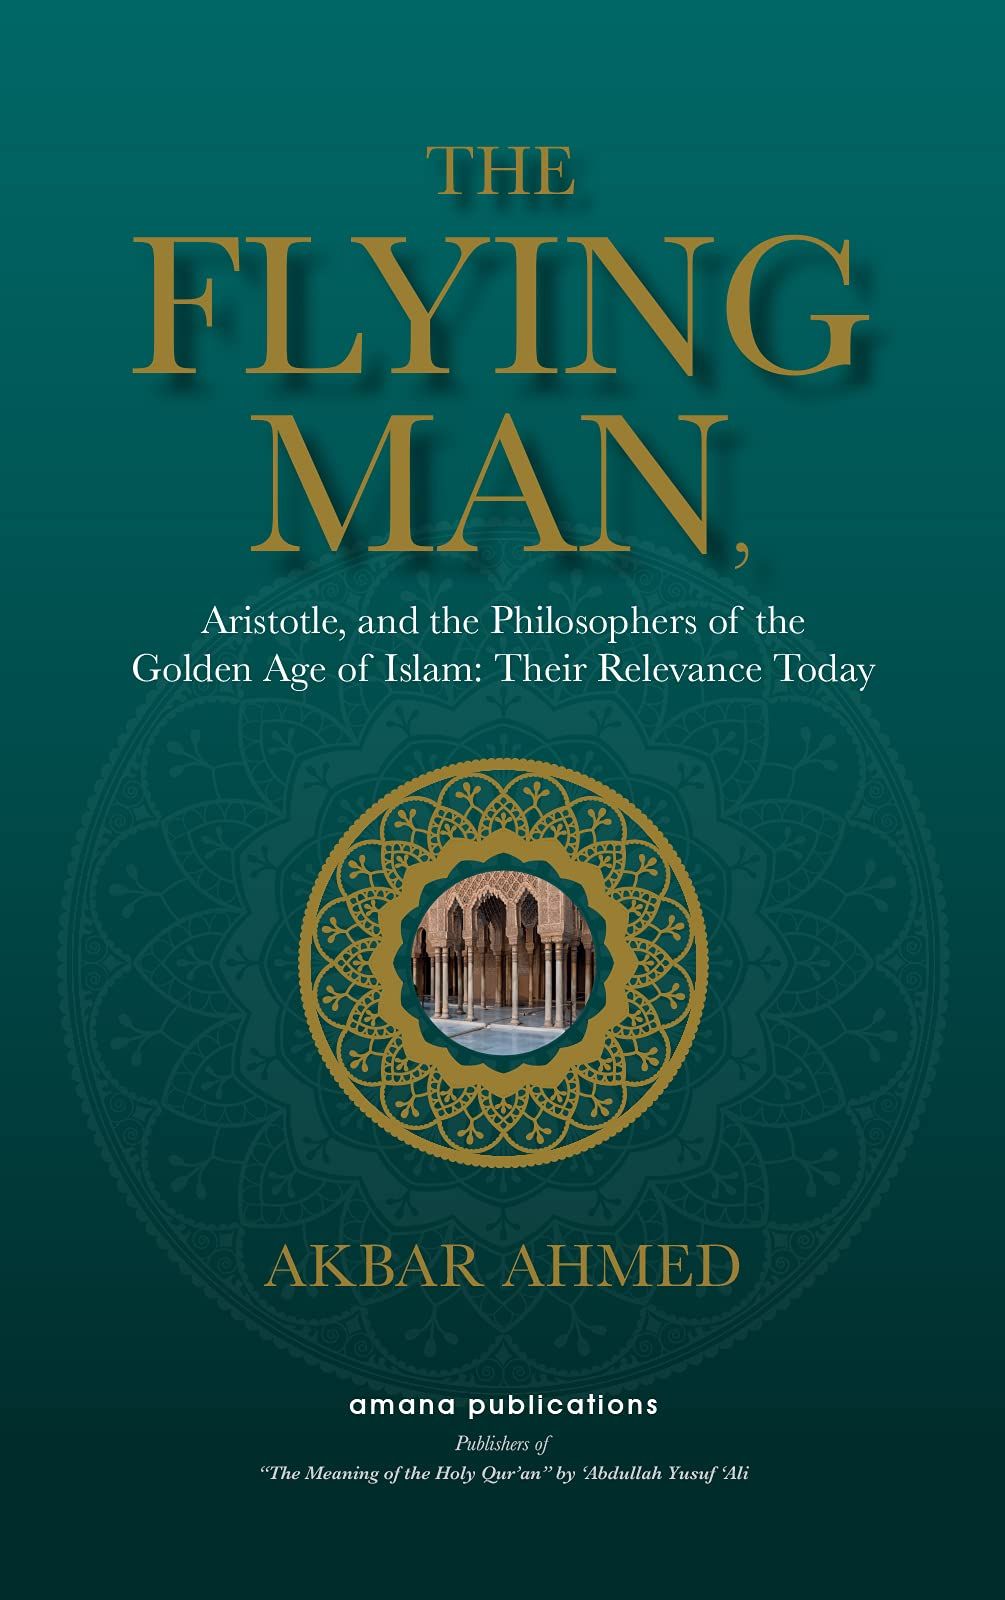 The Flying Man : Aristotle, and the Philosophers of the Golden Age of Islam : Their Relevance Today